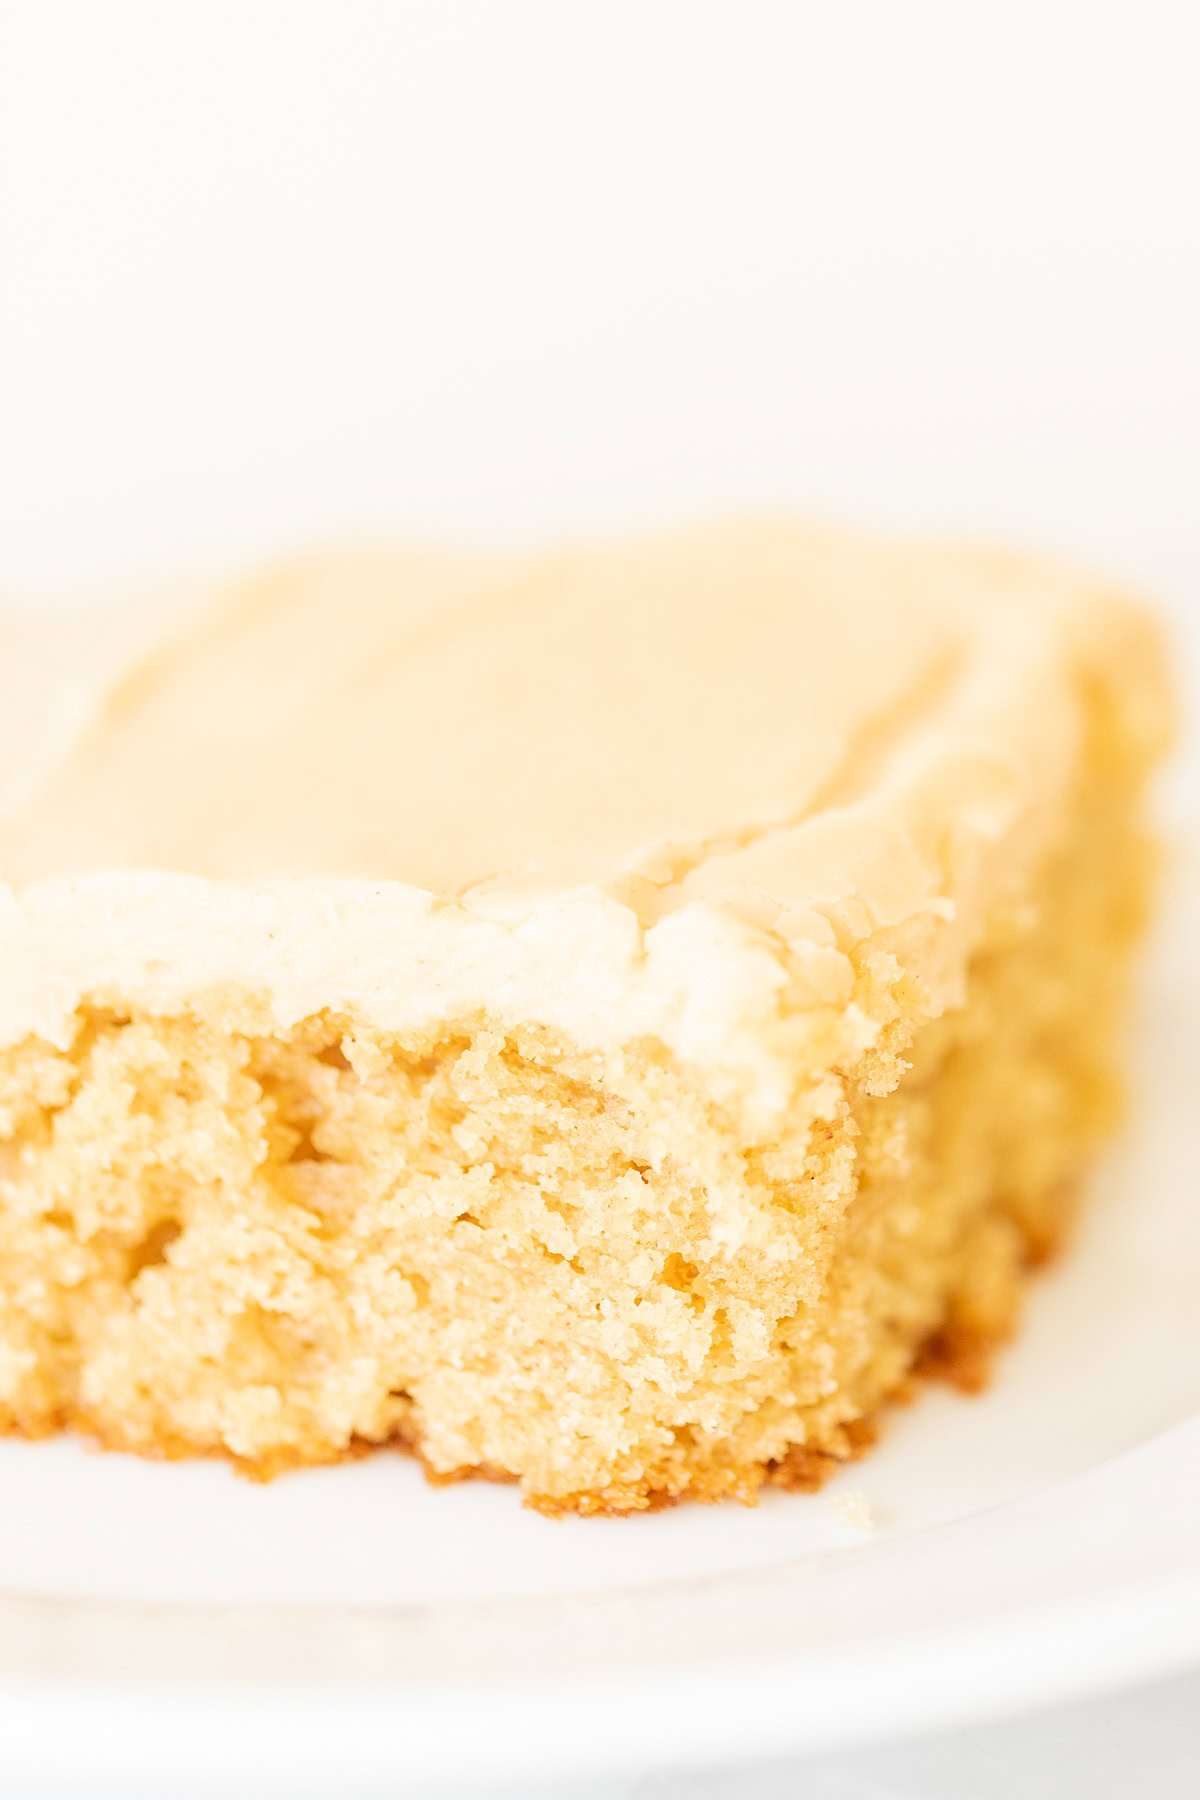 A close-up of a slice of moist peanut butter cake with a creamy top layer on a white plate.